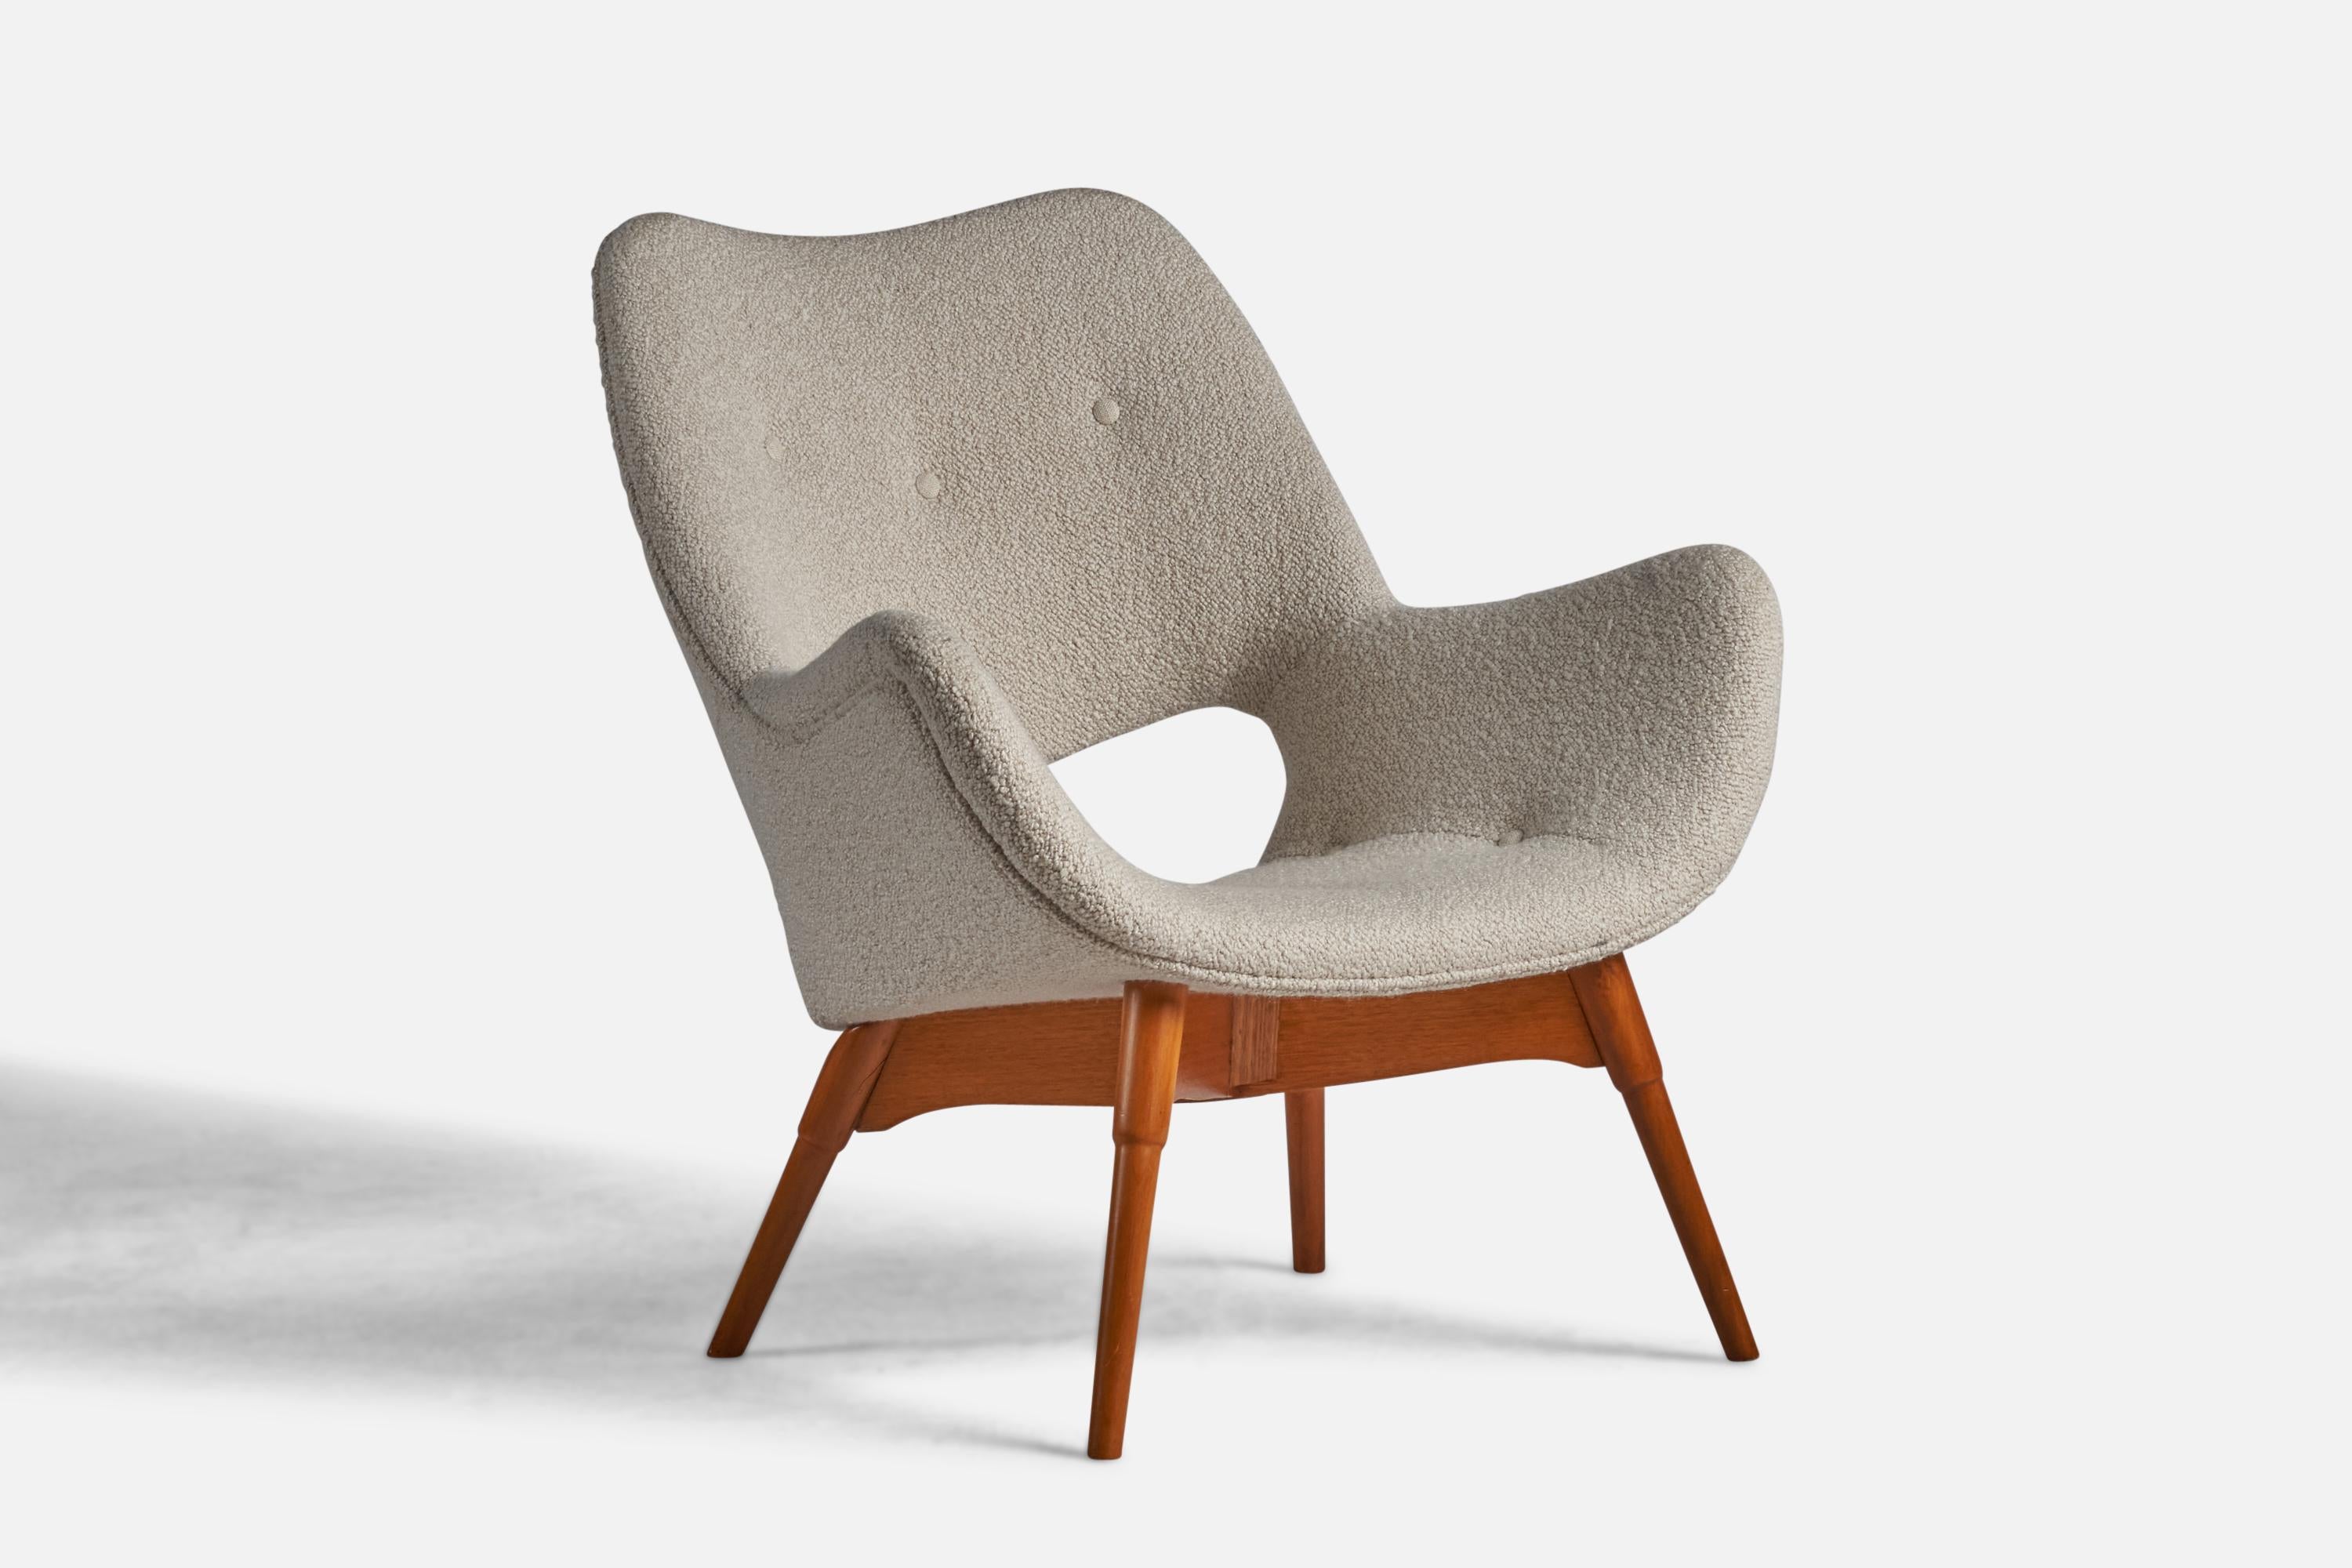 A rare oak and light grey beige fabric lounge chair designed by Grant Featherston and produced by Kennett Bros. & Rayner, Australia, 1950s.

14” seat height

